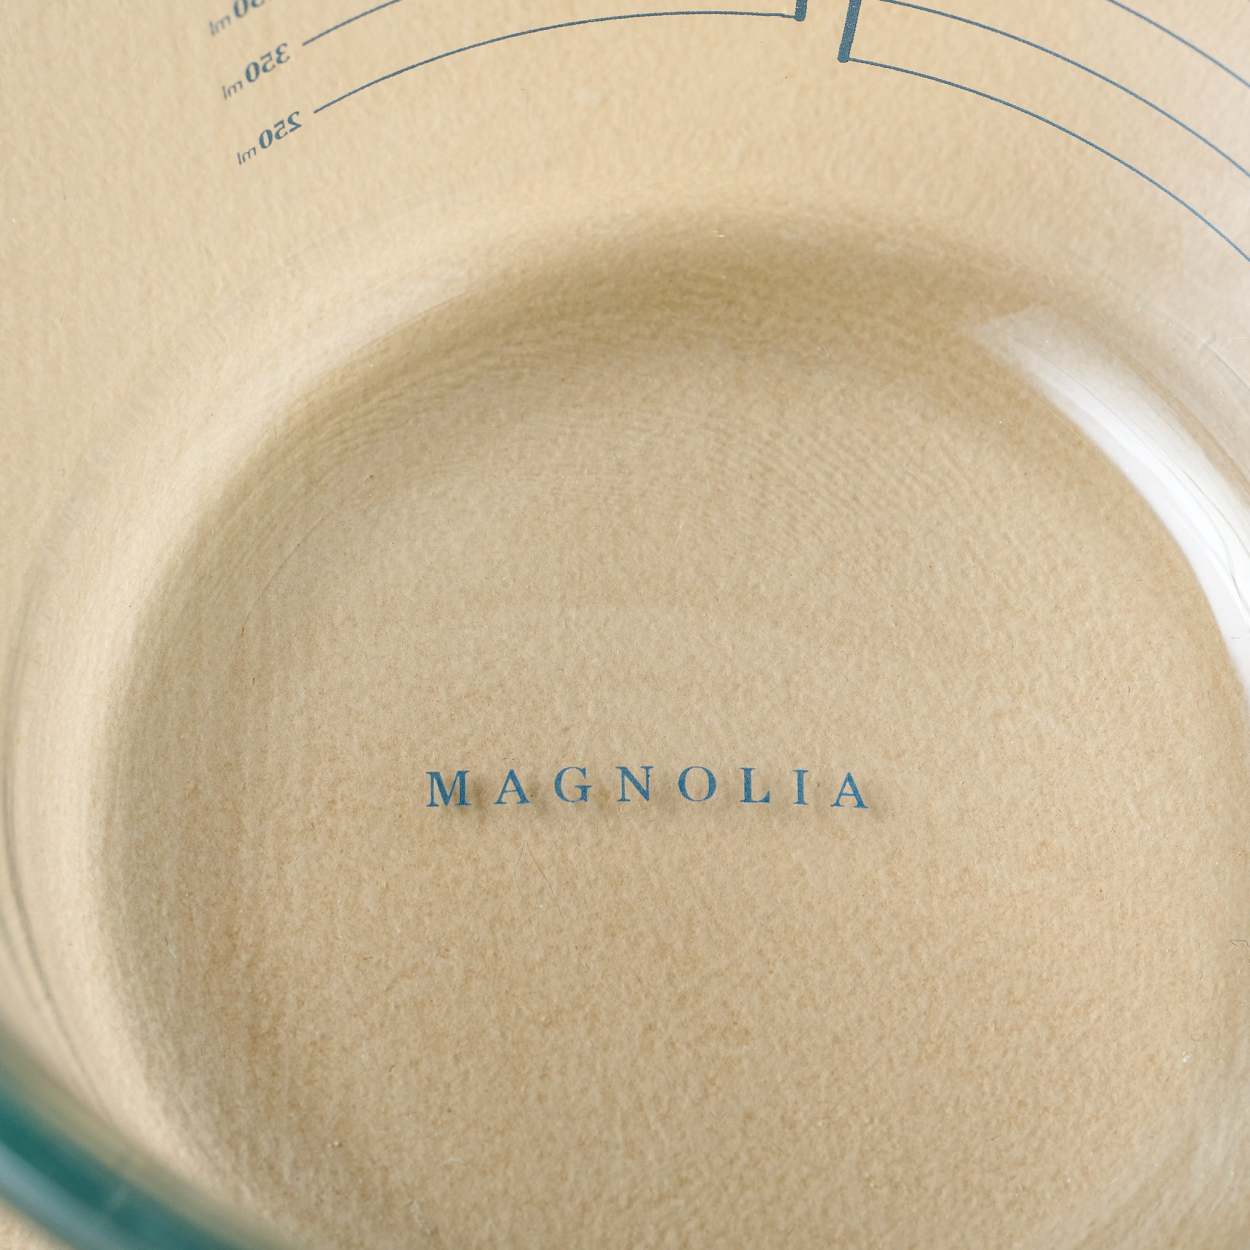 Green Glass One Cup Measuring Cup - Magnolia